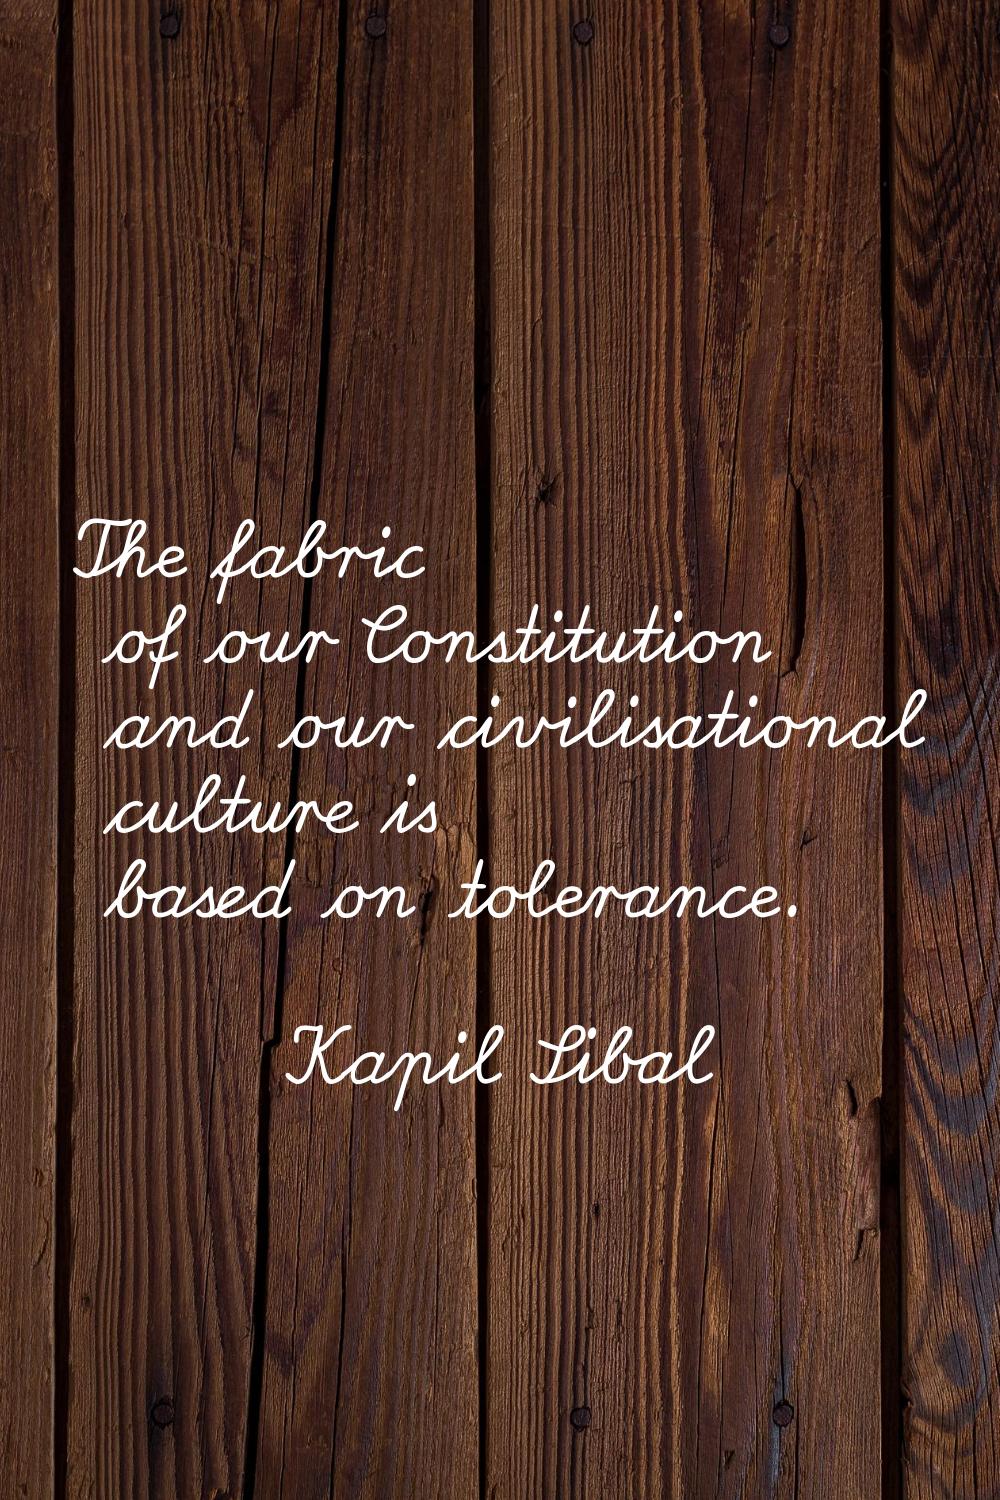 The fabric of our Constitution and our civilisational culture is based on tolerance.